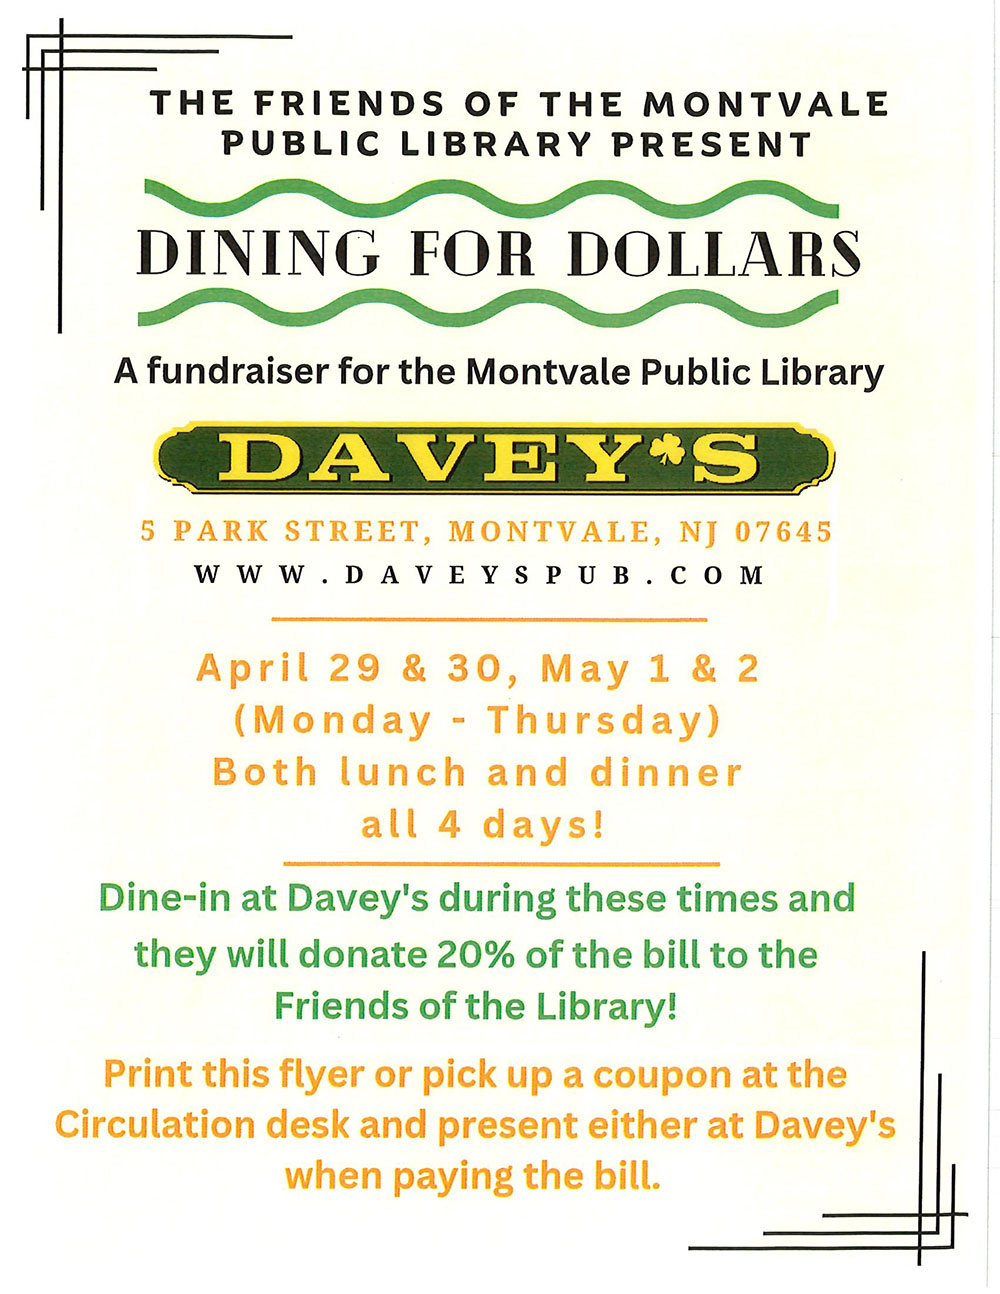 Dining for Dollars event flyer